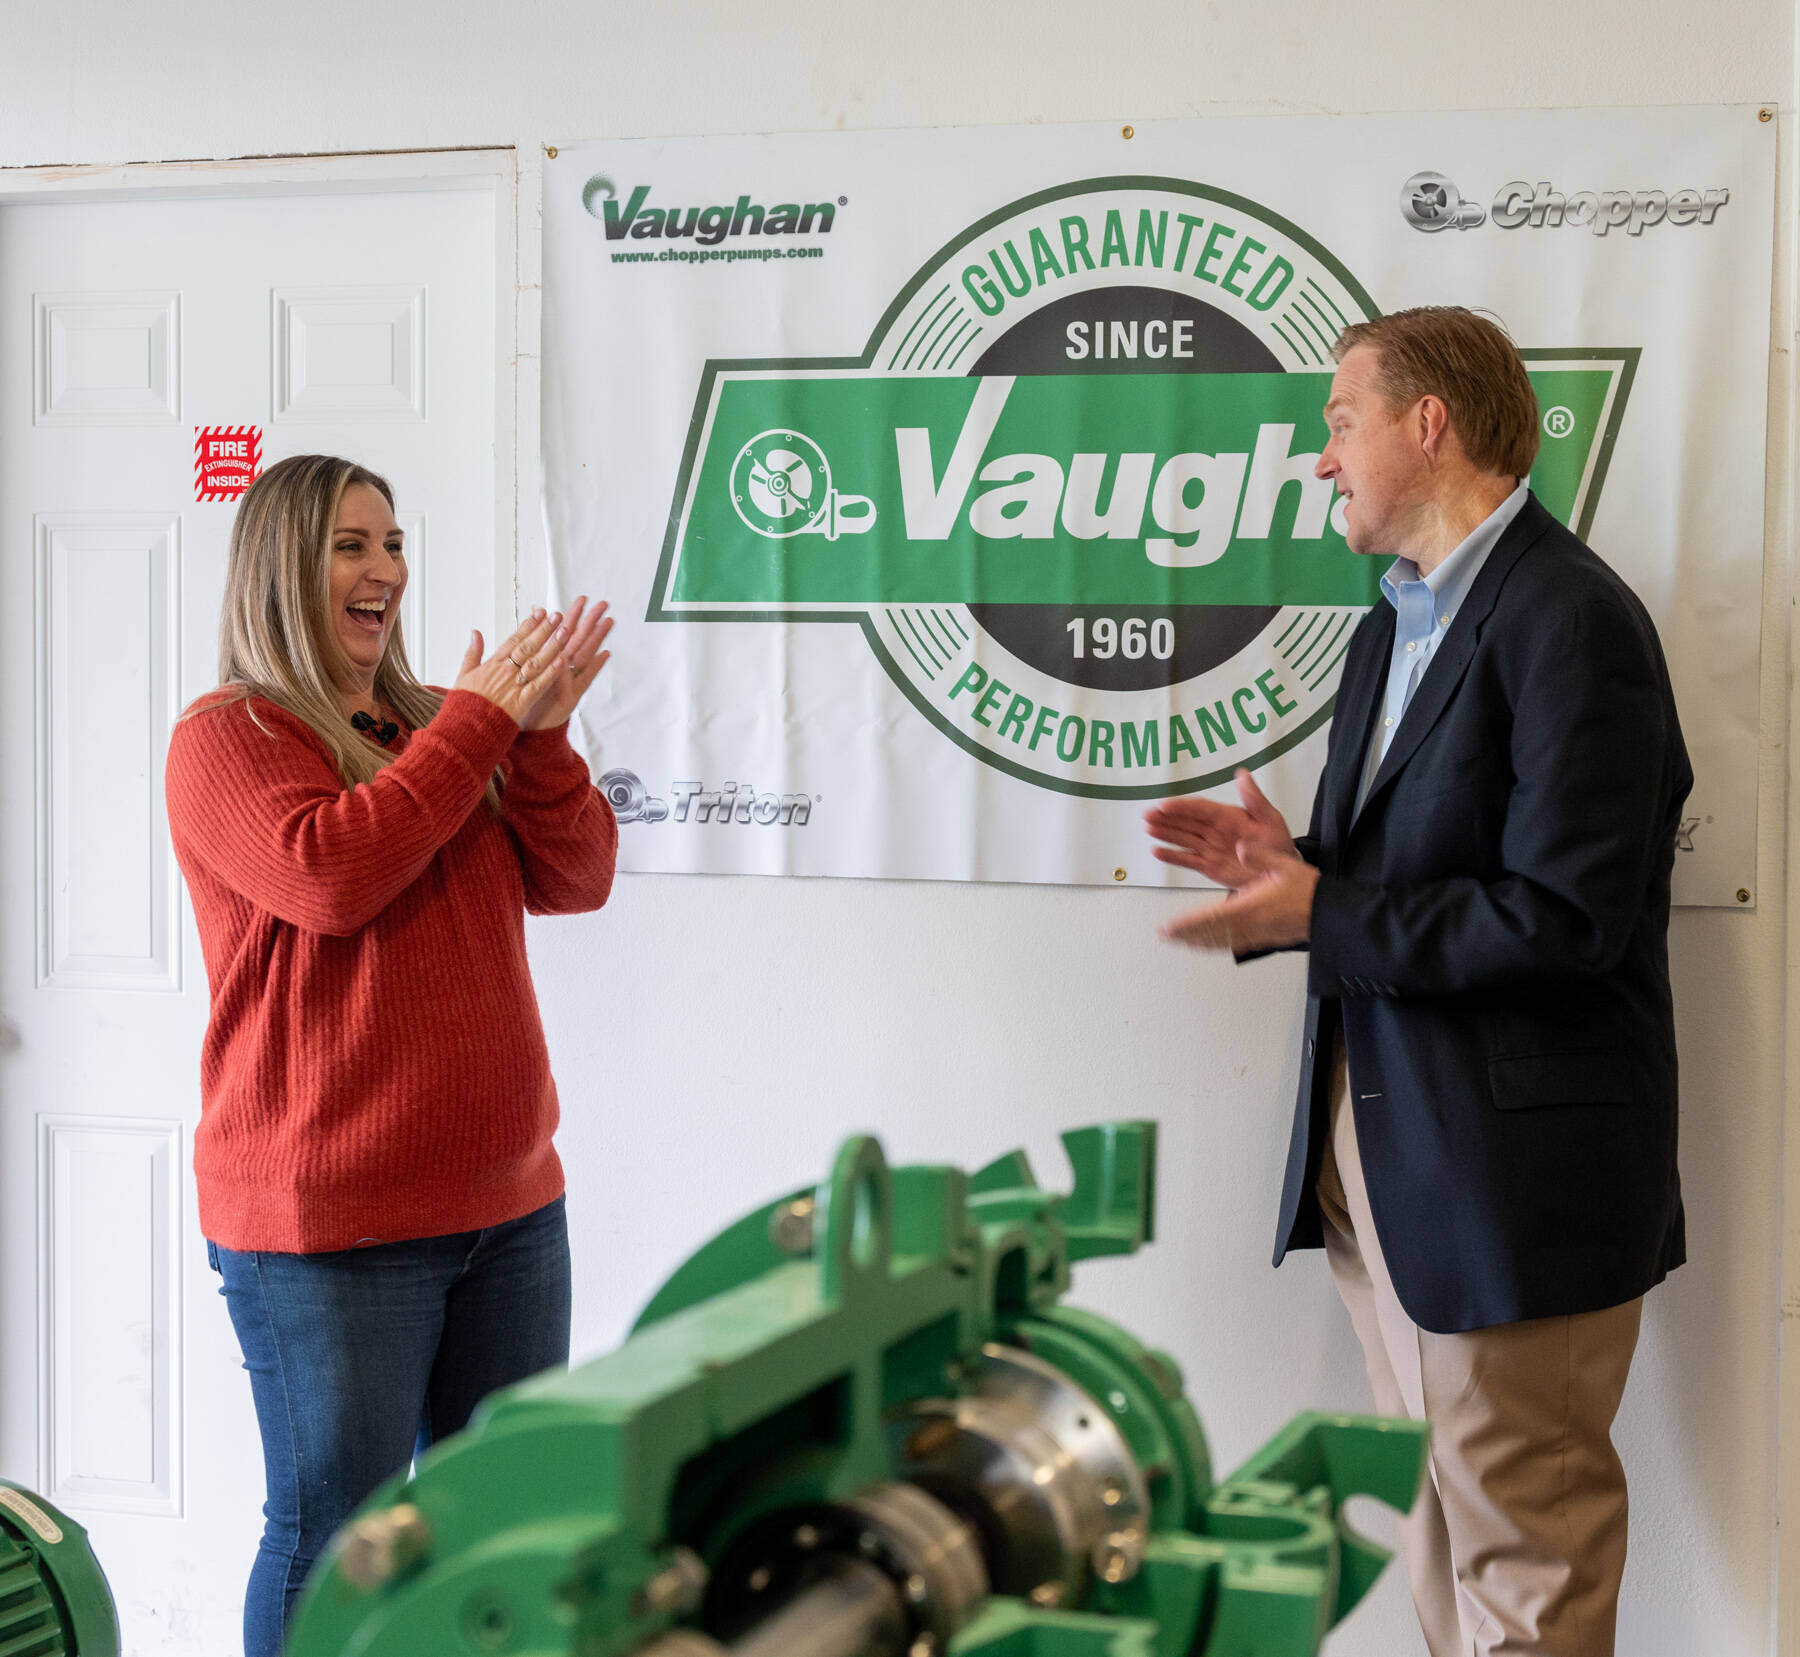 Stacie Vaughan, CFO of Vaughan Industries, accepts the 2021 AWB Manufacturer of the Year award from AWB President Kris Johnson on Oct. 1, 2021, during a visit by the AWB Manufacturing Week bus tour to Vaughan’s Montesano facility. (Photo: Brian Mittge/AWB).